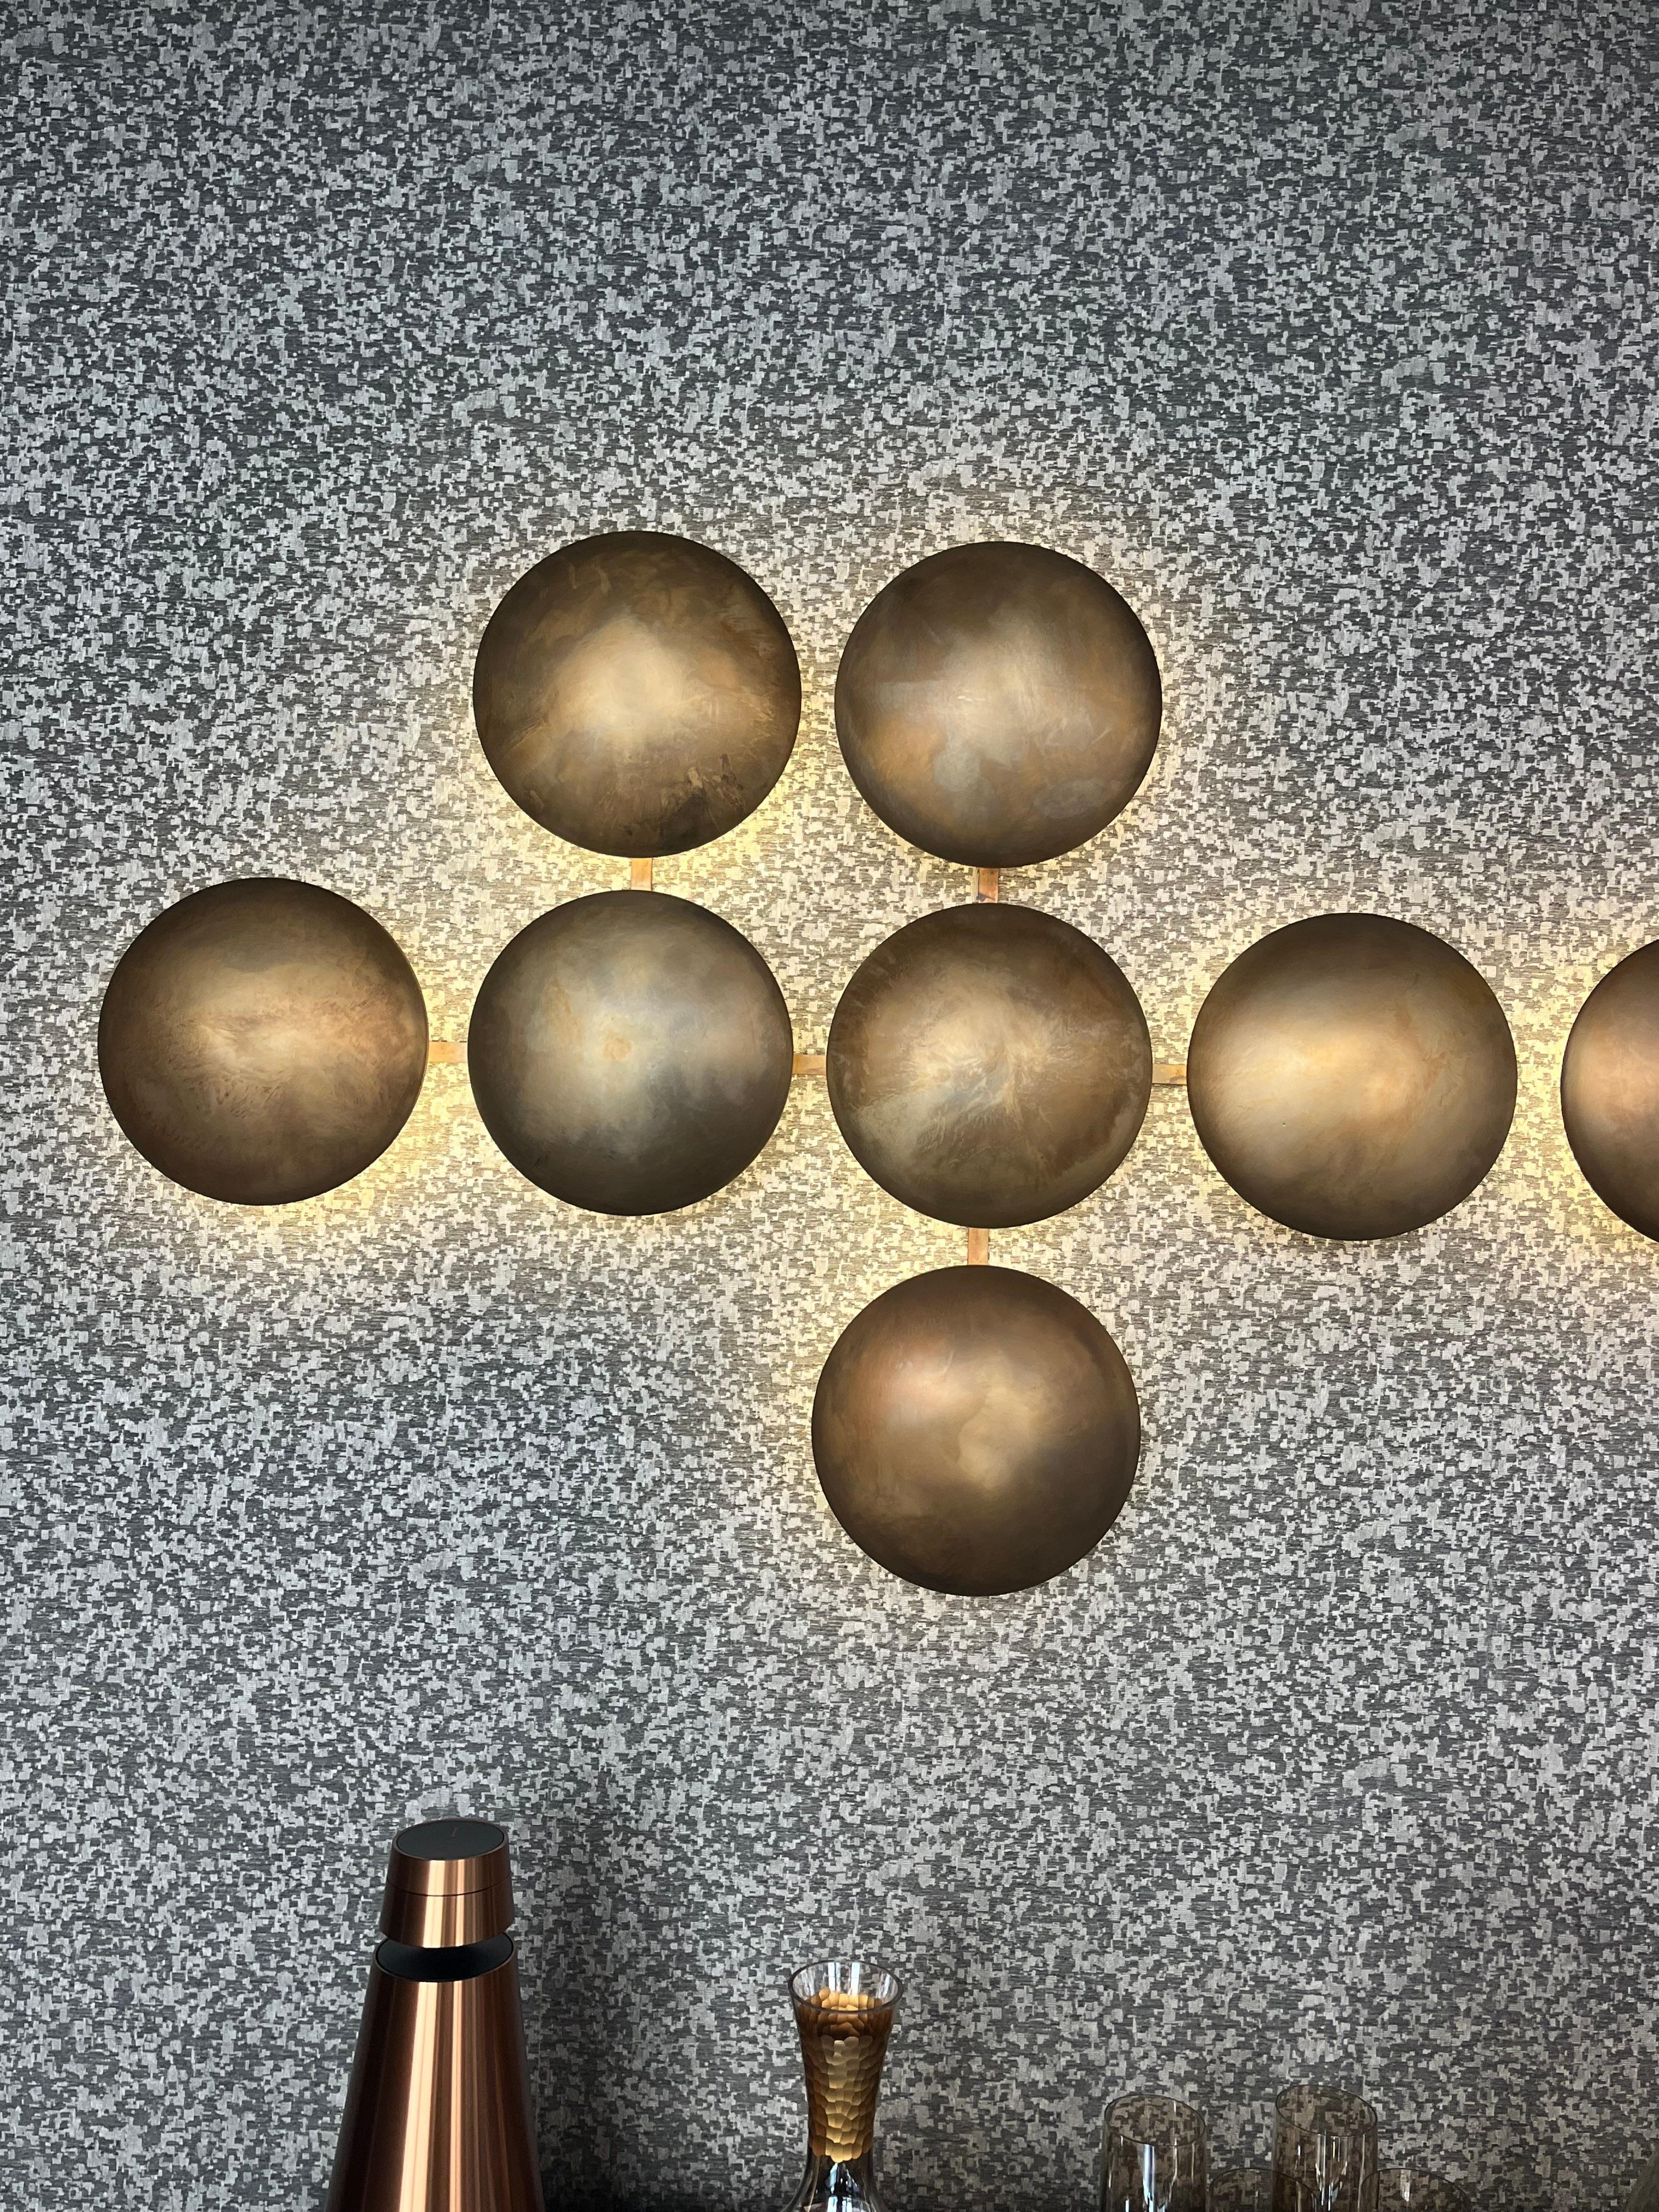 More an art installation than a light fixture, LED power-saving Light Clips are artistic and chic, emitting soft light while brightening up any bland wall.